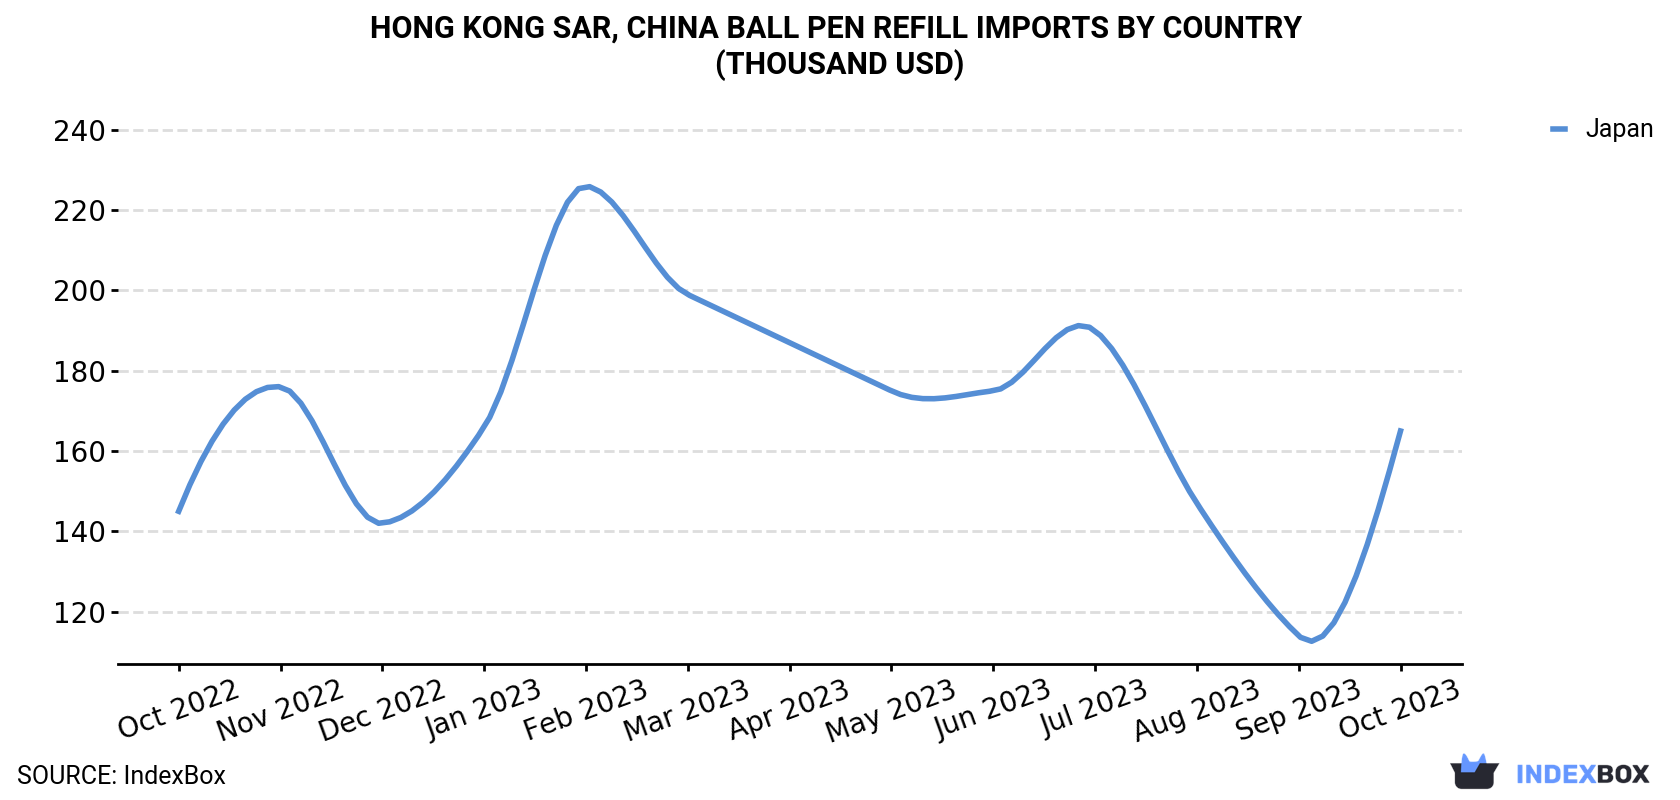 Hong Kong Ball Pen Refill Imports By Country (Thousand USD)